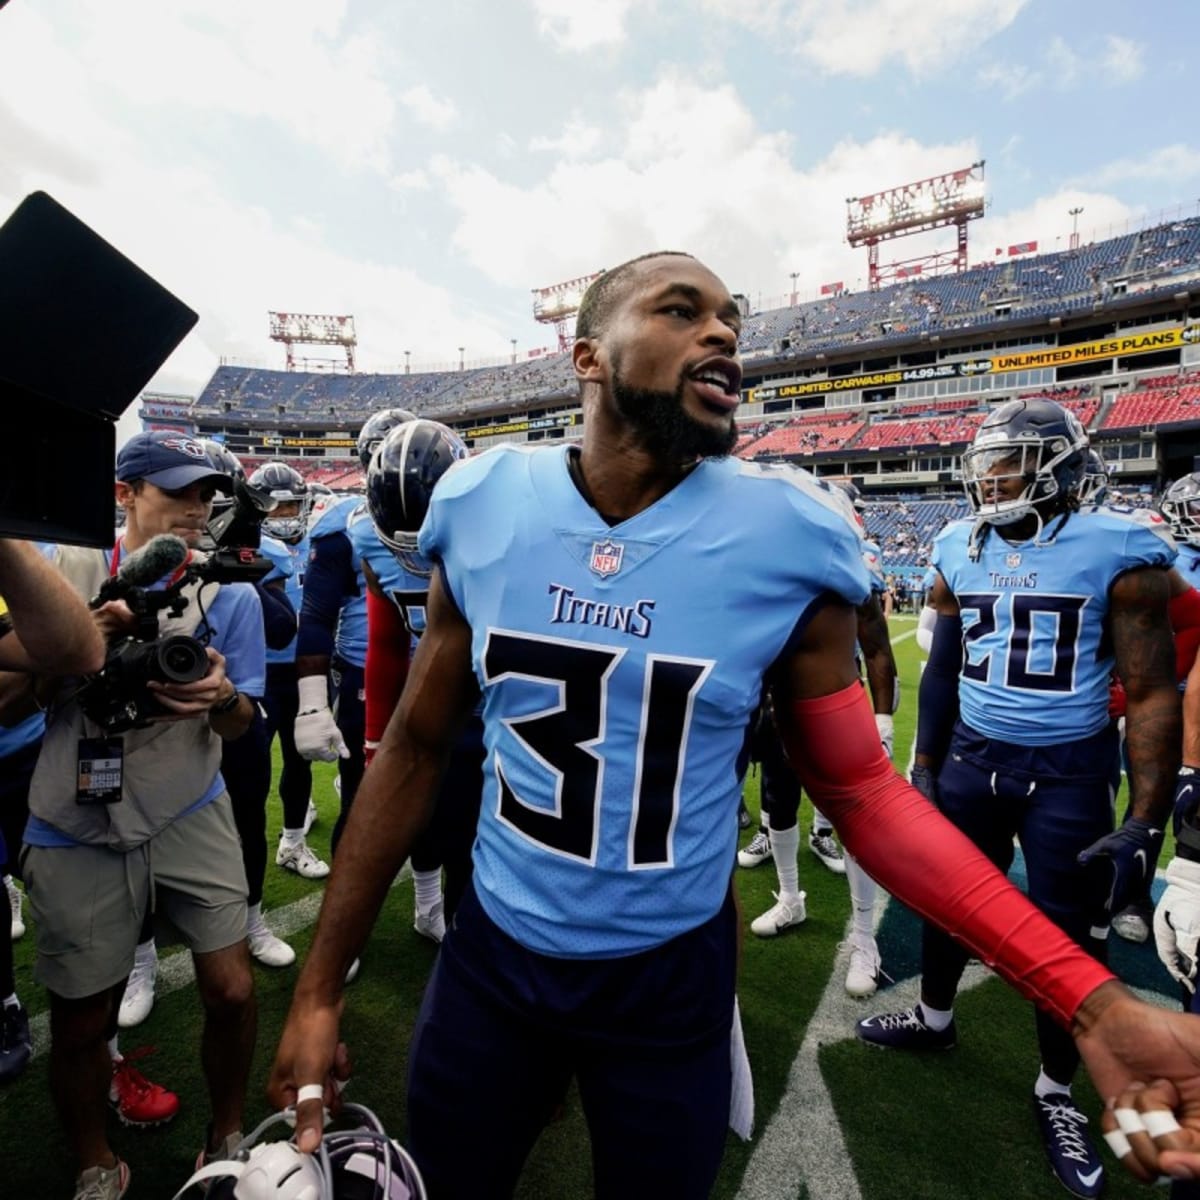 Tennessee Titans: Amani Hooker can become a household name in 2021